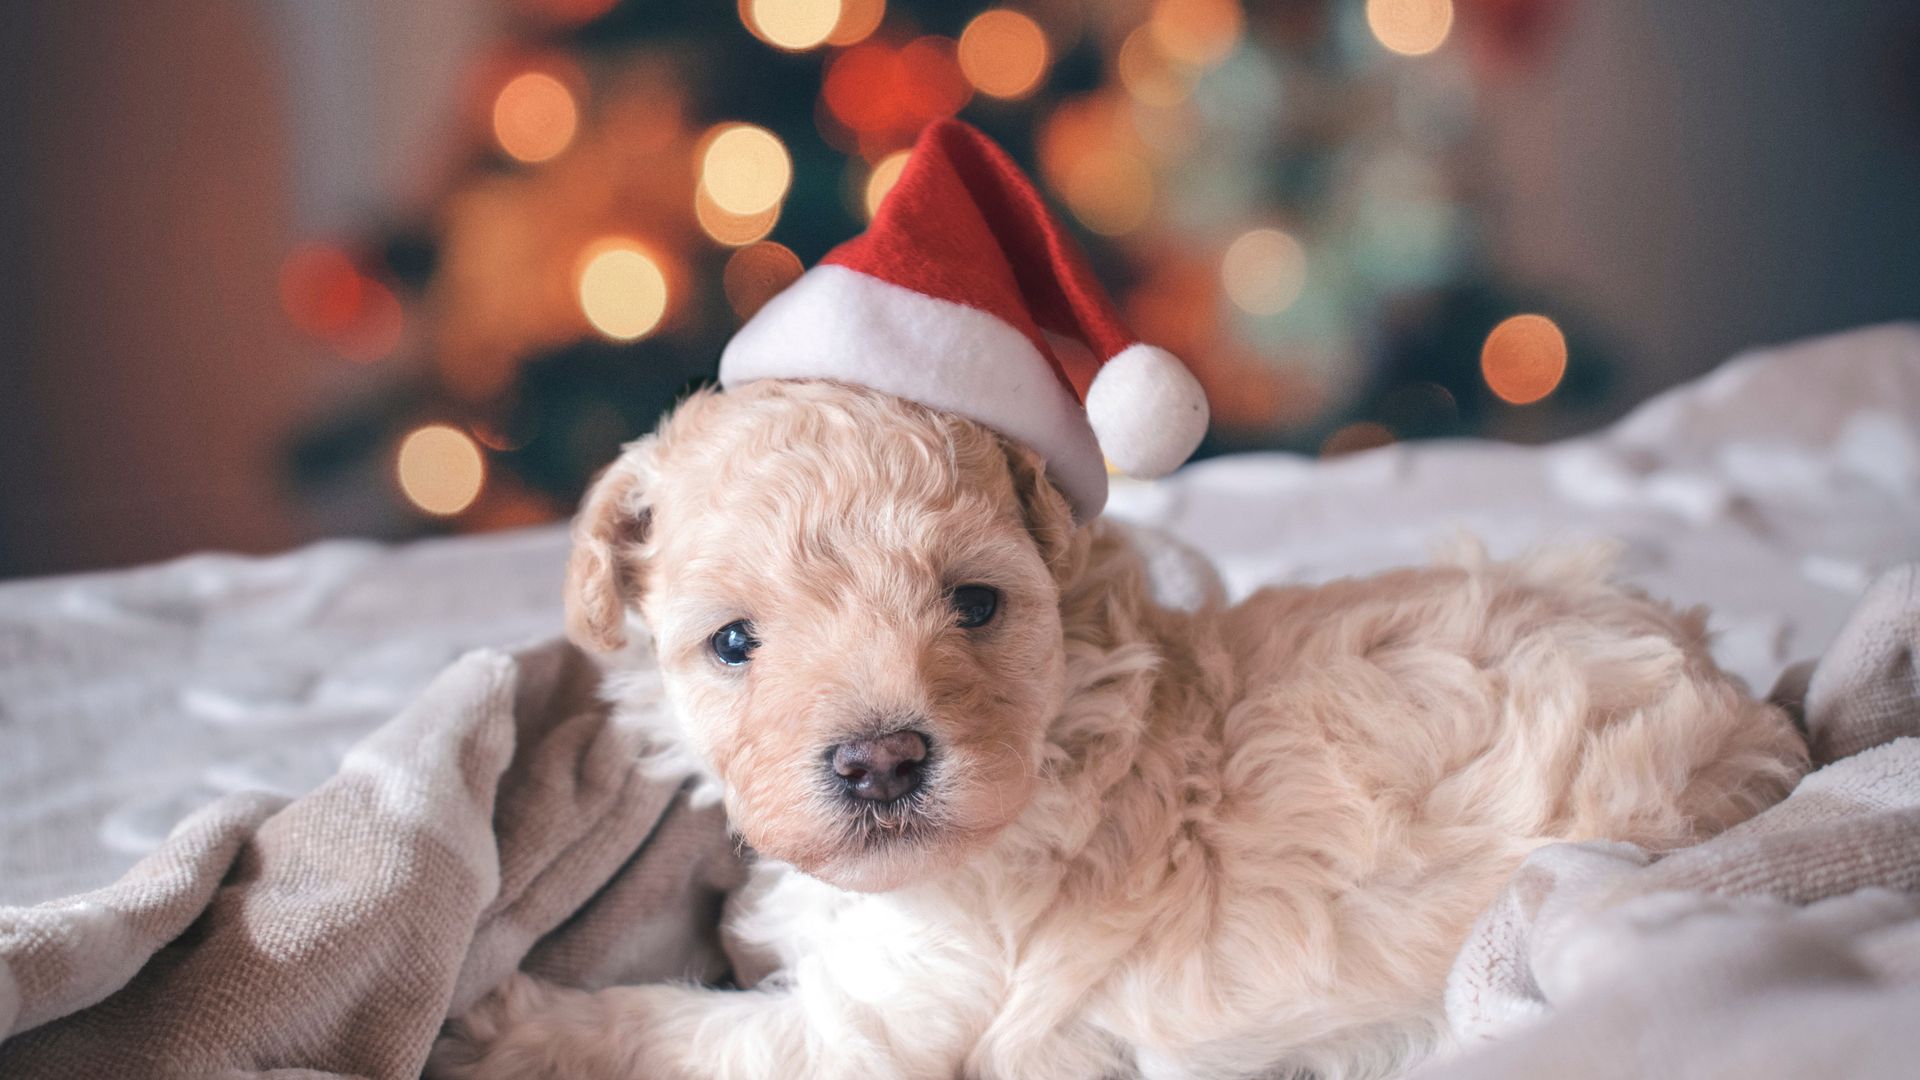 Cute Puppy with Christmas Hat Wallpaper